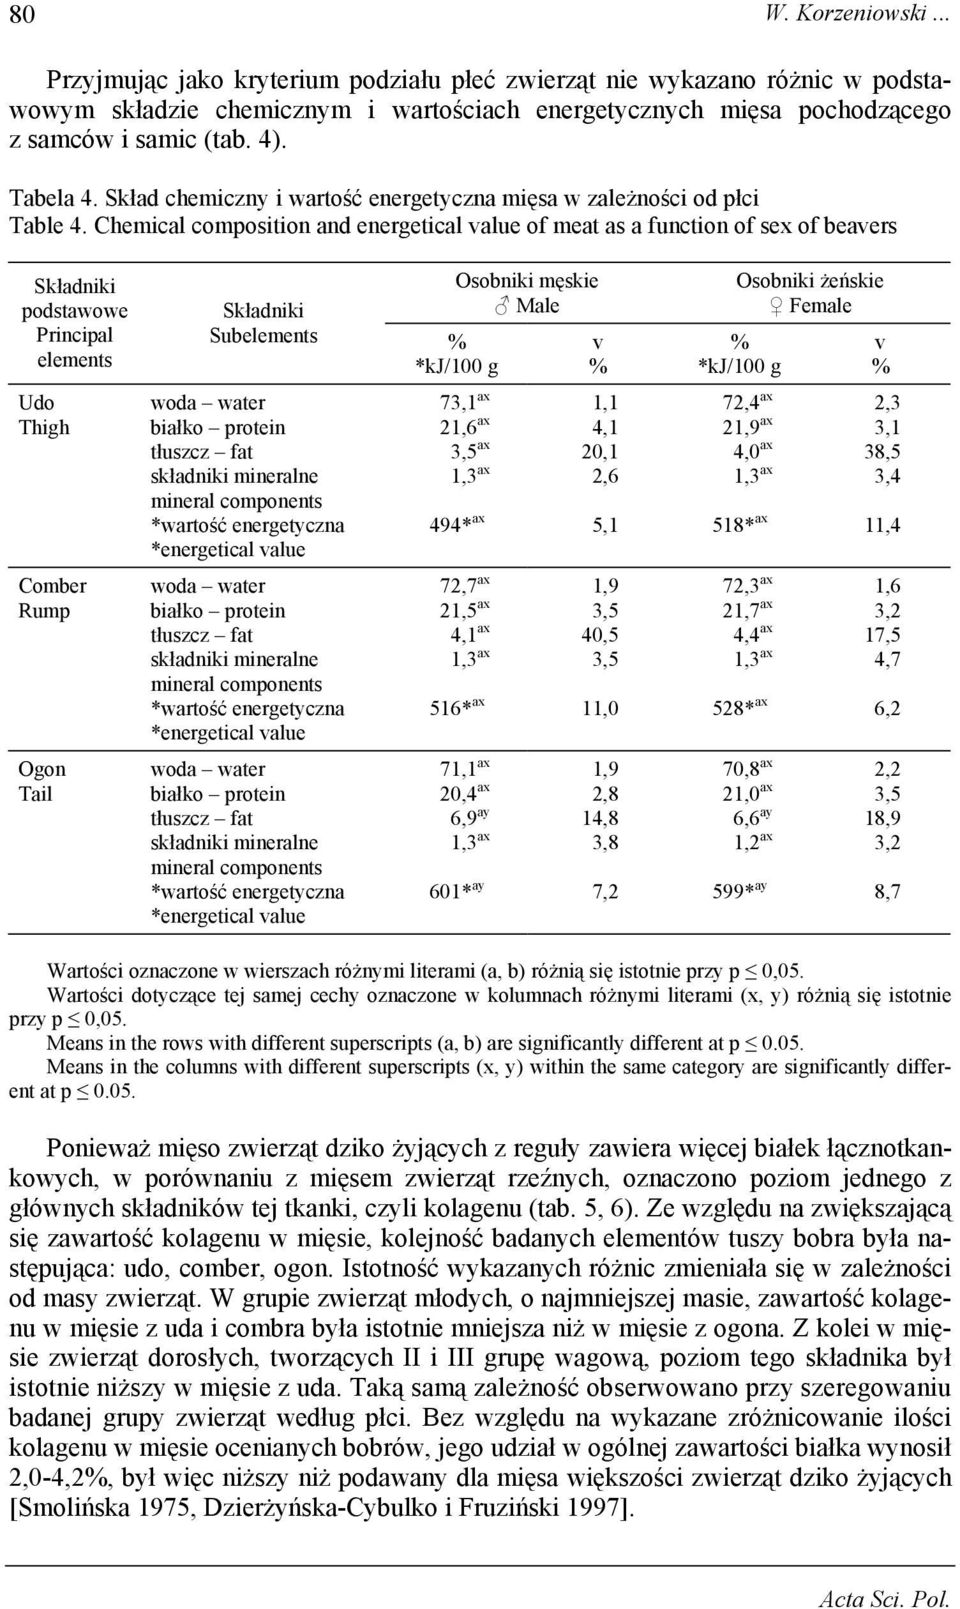 Chemical composition and energetical alue of meat as a function of sex of beaers podstawowe Principal elements Subelements Osobniki męskie Male 73,1 ax 21,6 ax 3,5 ax 494* ax 72,7 ax 21,5 ax 4,1 ax